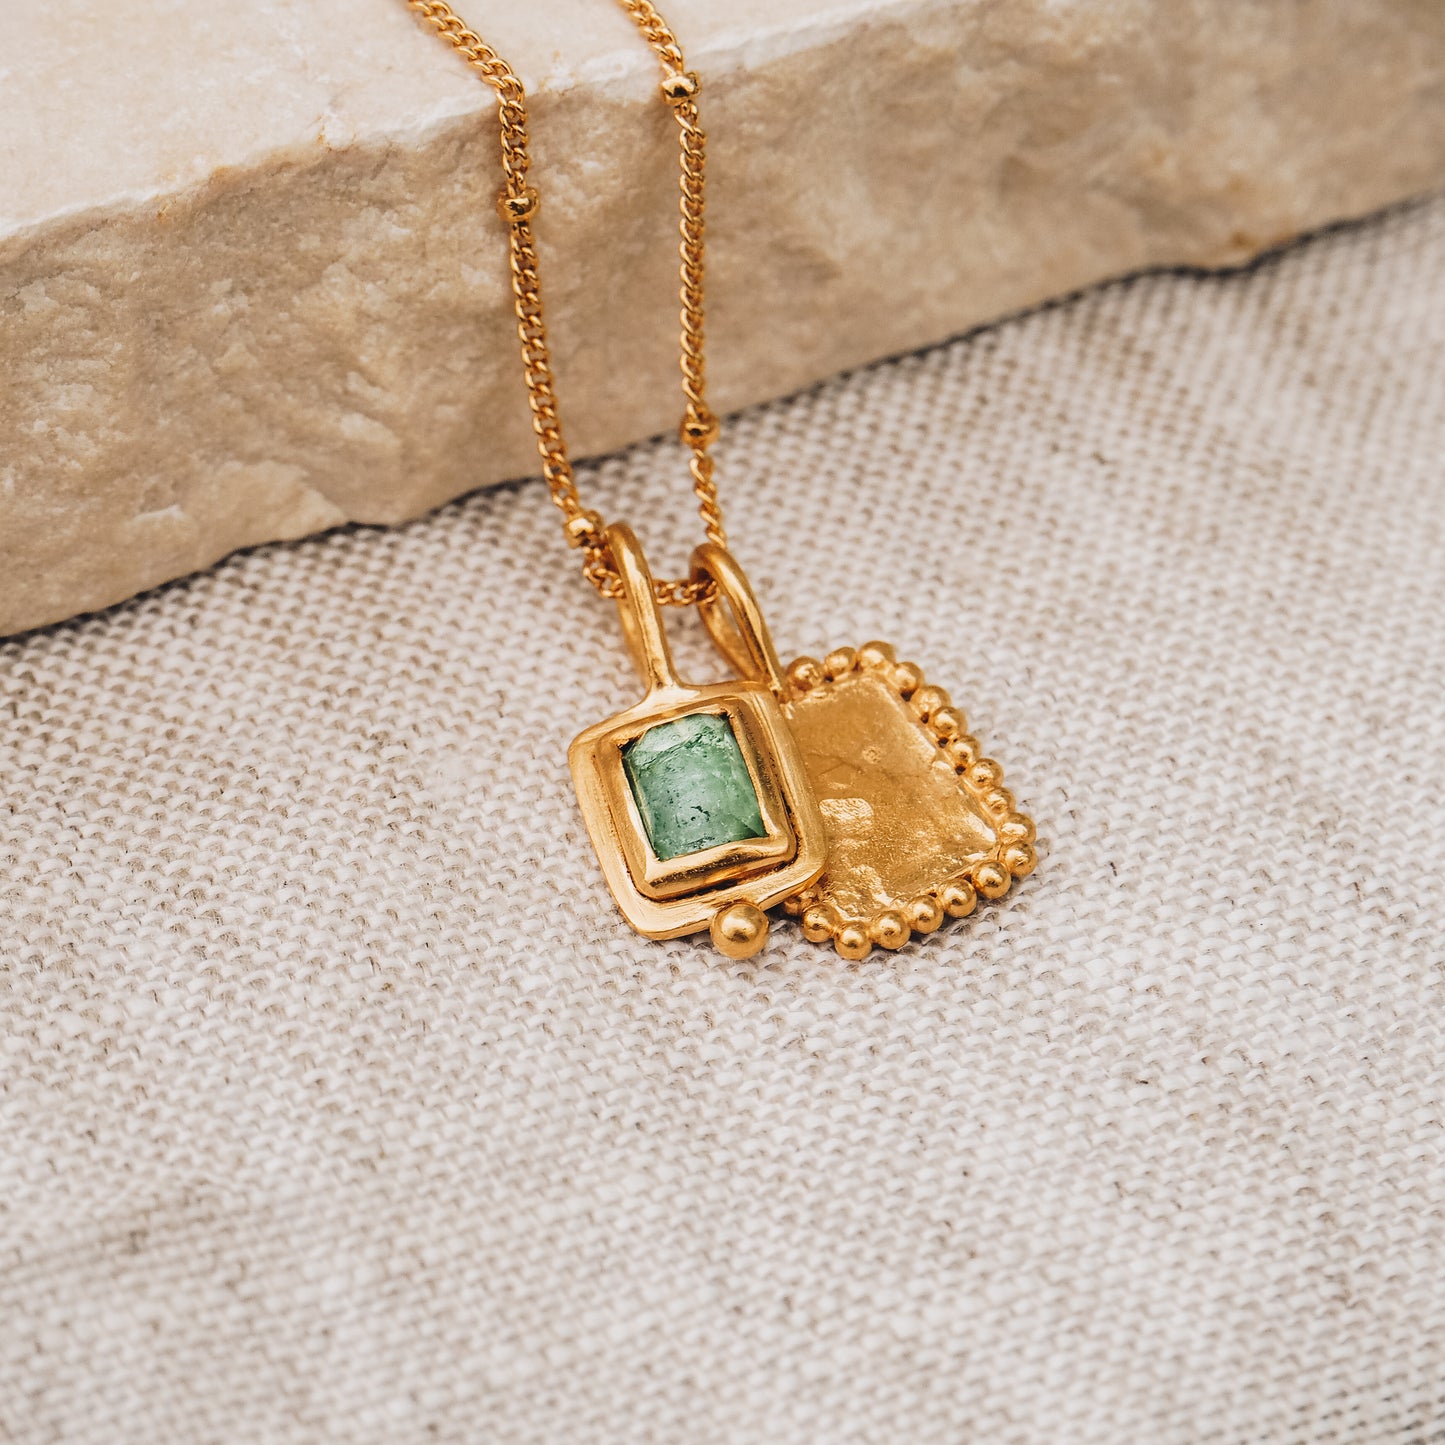 Exquisite square gold pendant with a breathtaking blue rose cut tourmaline gemstone and delicate granulation, suspended elegantly from a fine satellite chain.